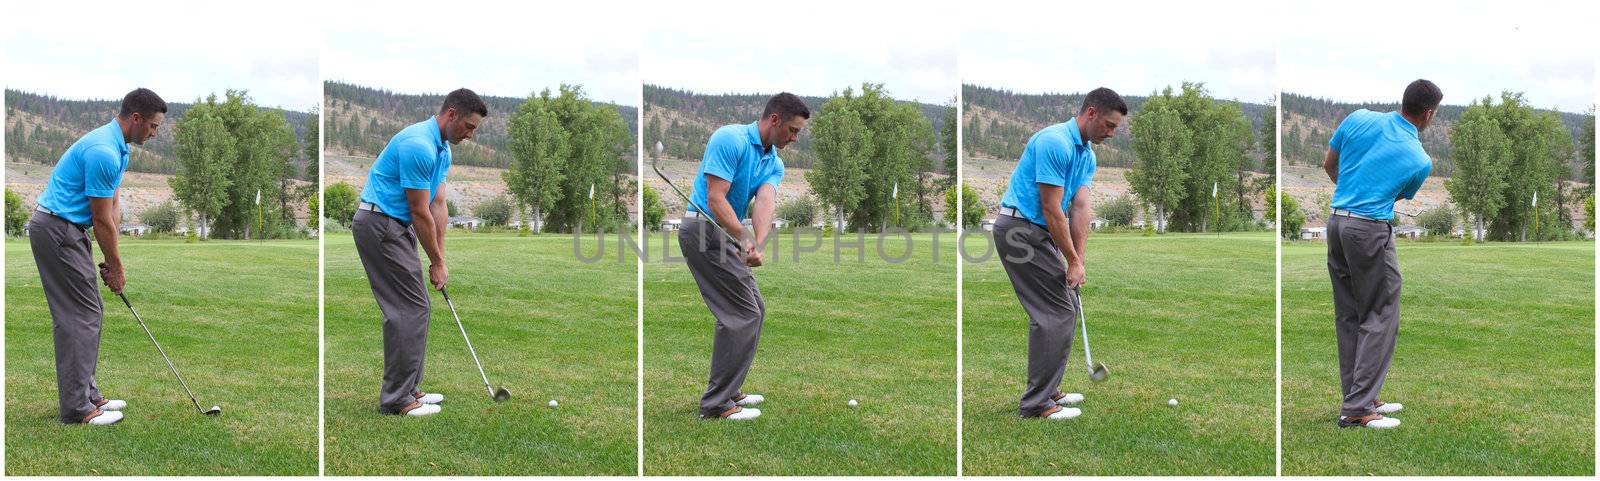 Combination of steps to a golf swing